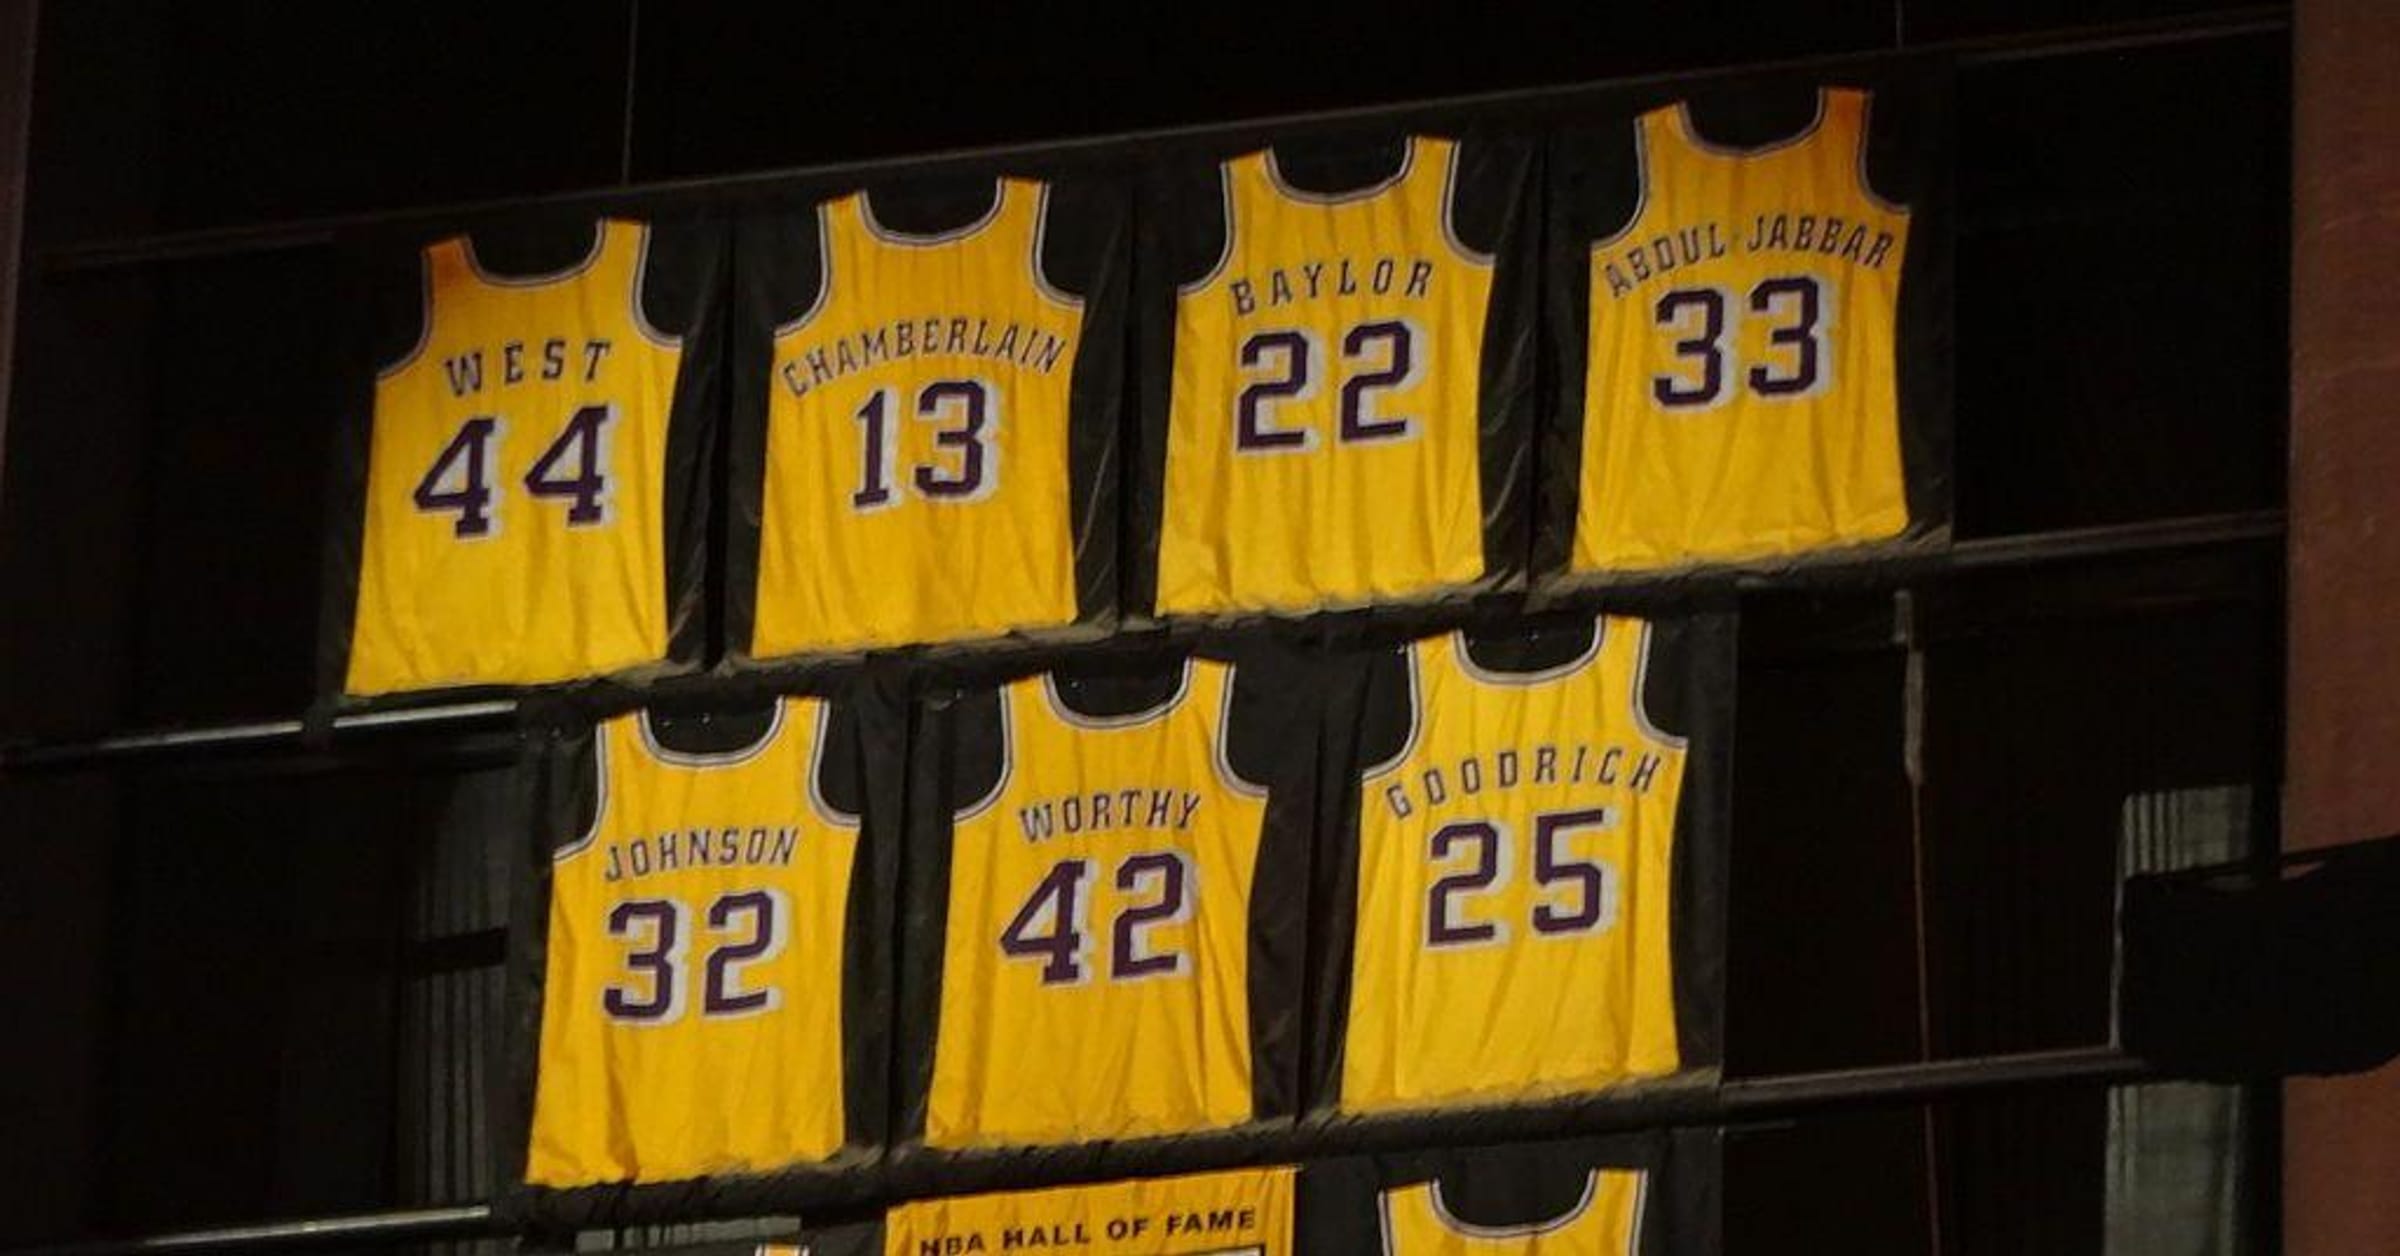 Lakers' retired numbers: How many numbers have the Lakers retired?